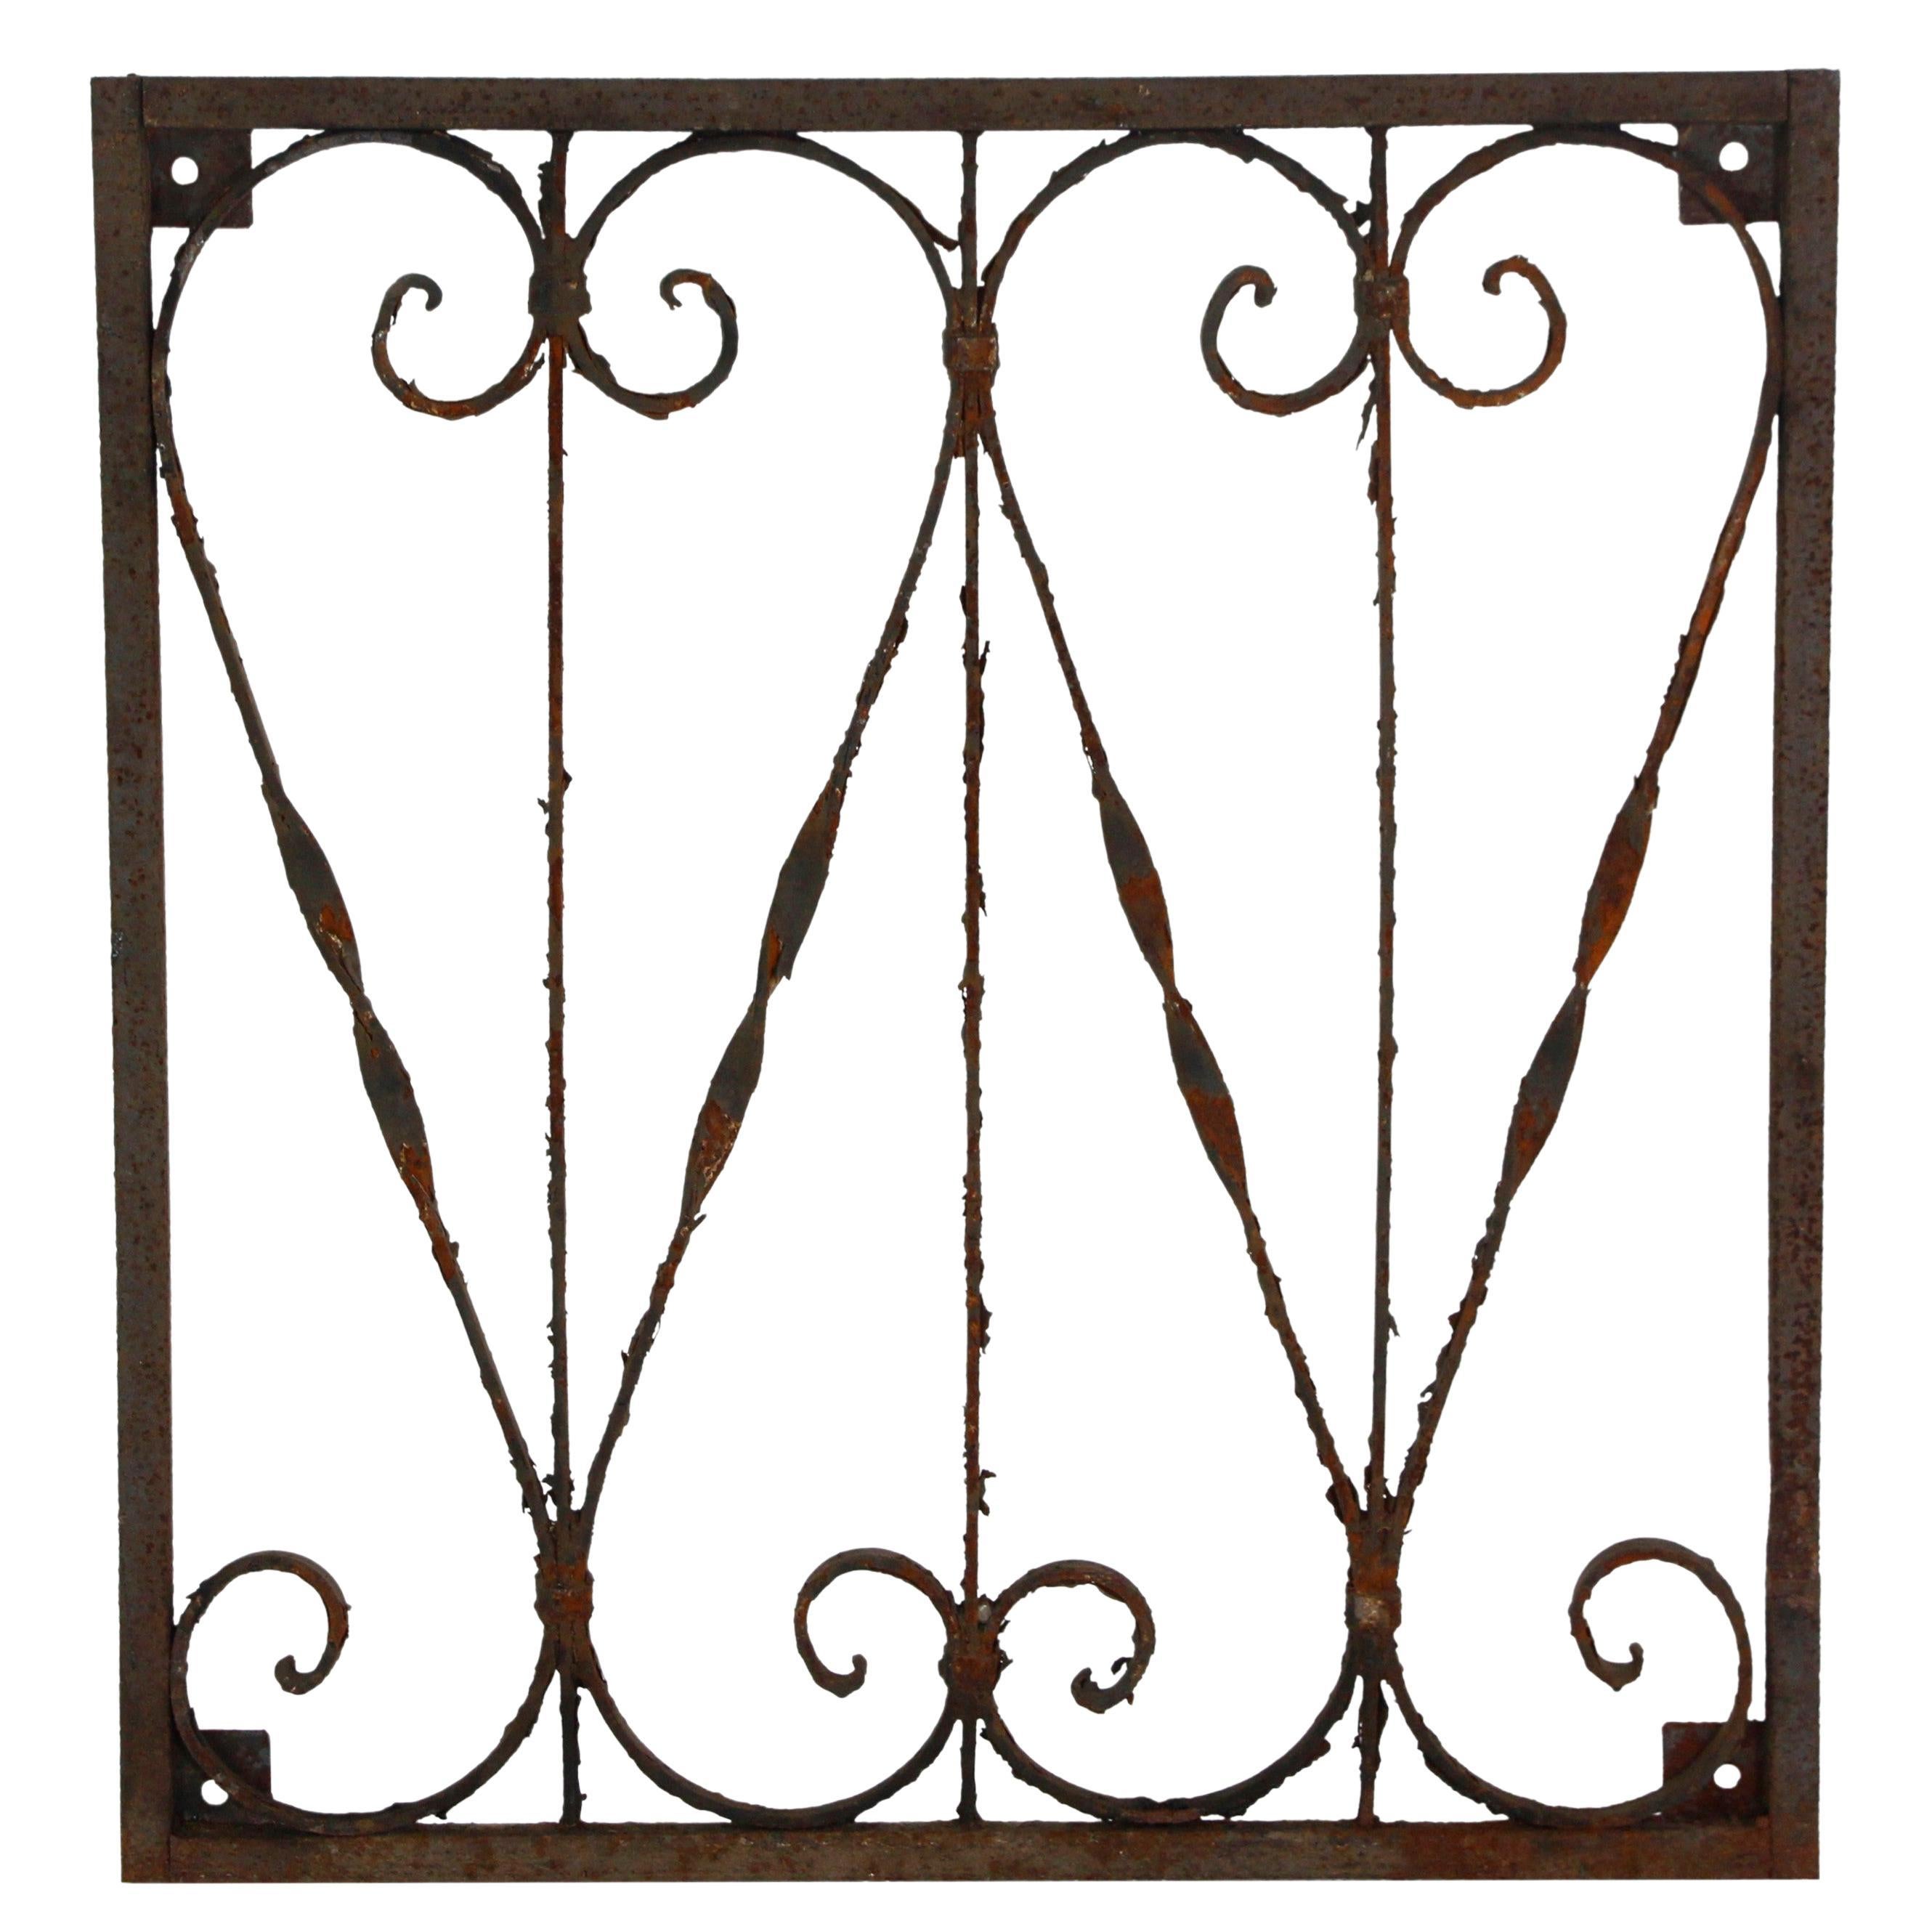 Antique Hand Wrought Iron Gate Fencing Panel w Swirls Pinning Construction For Sale